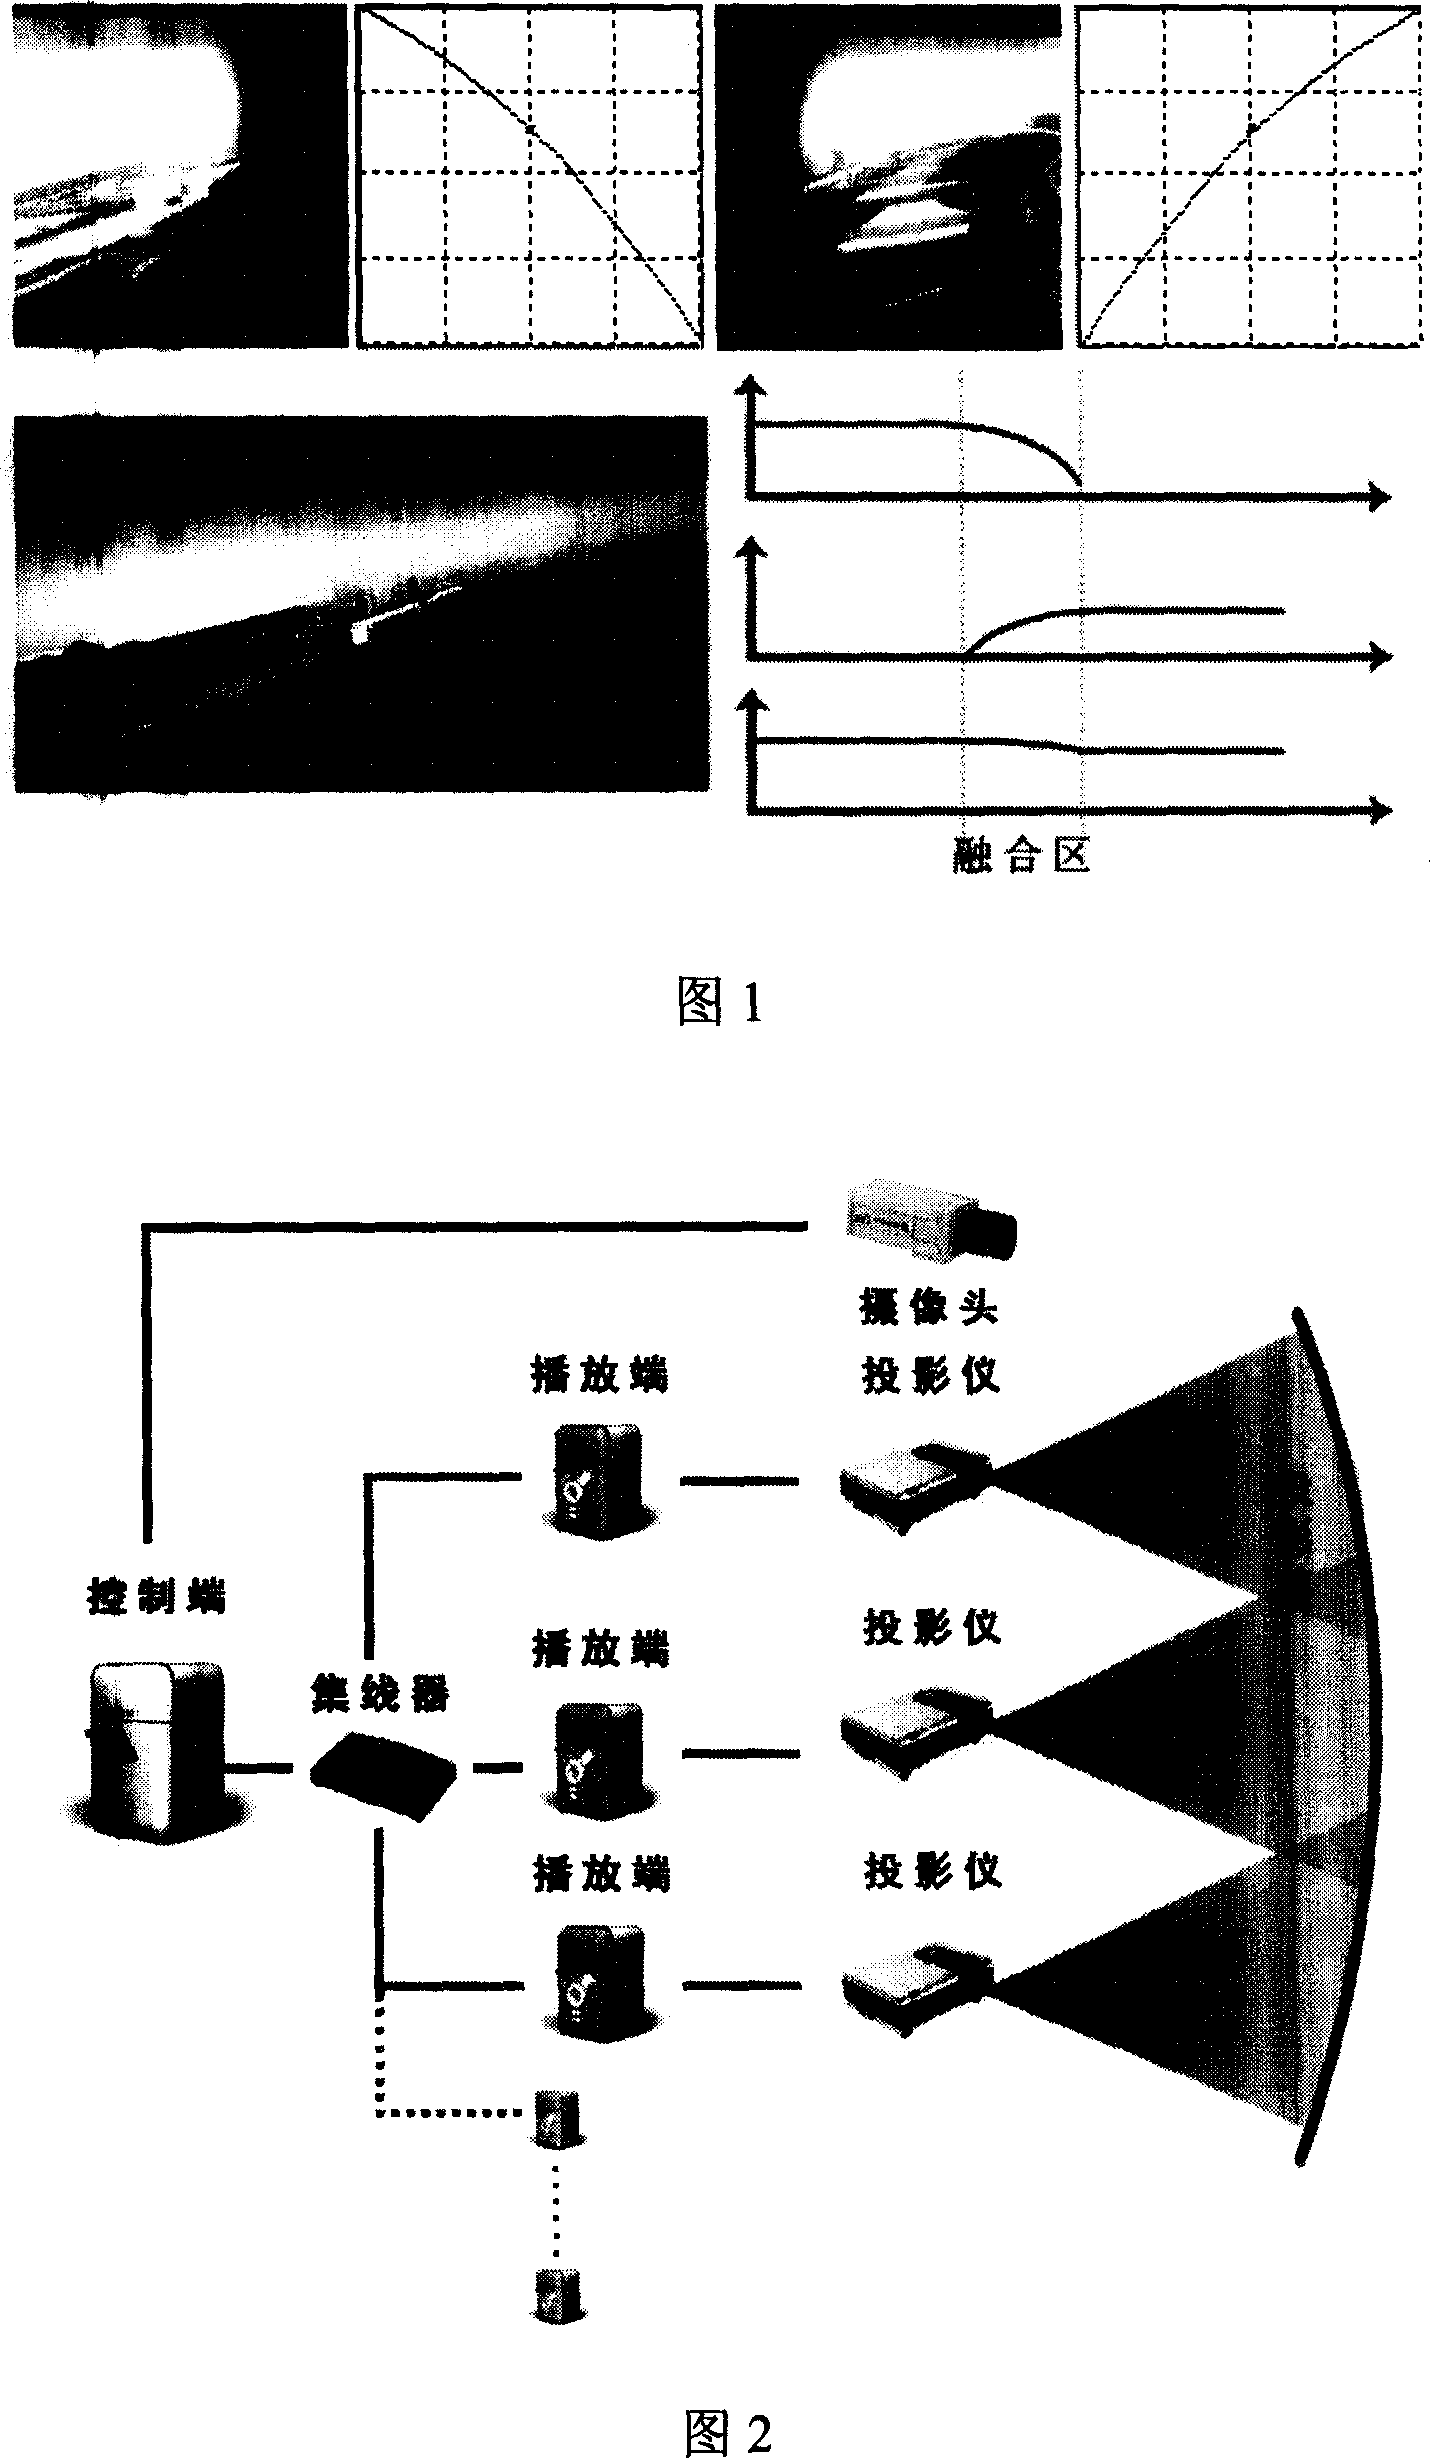 Multiscreen playing automatically integrating pretreatment method suitable for irregular screen